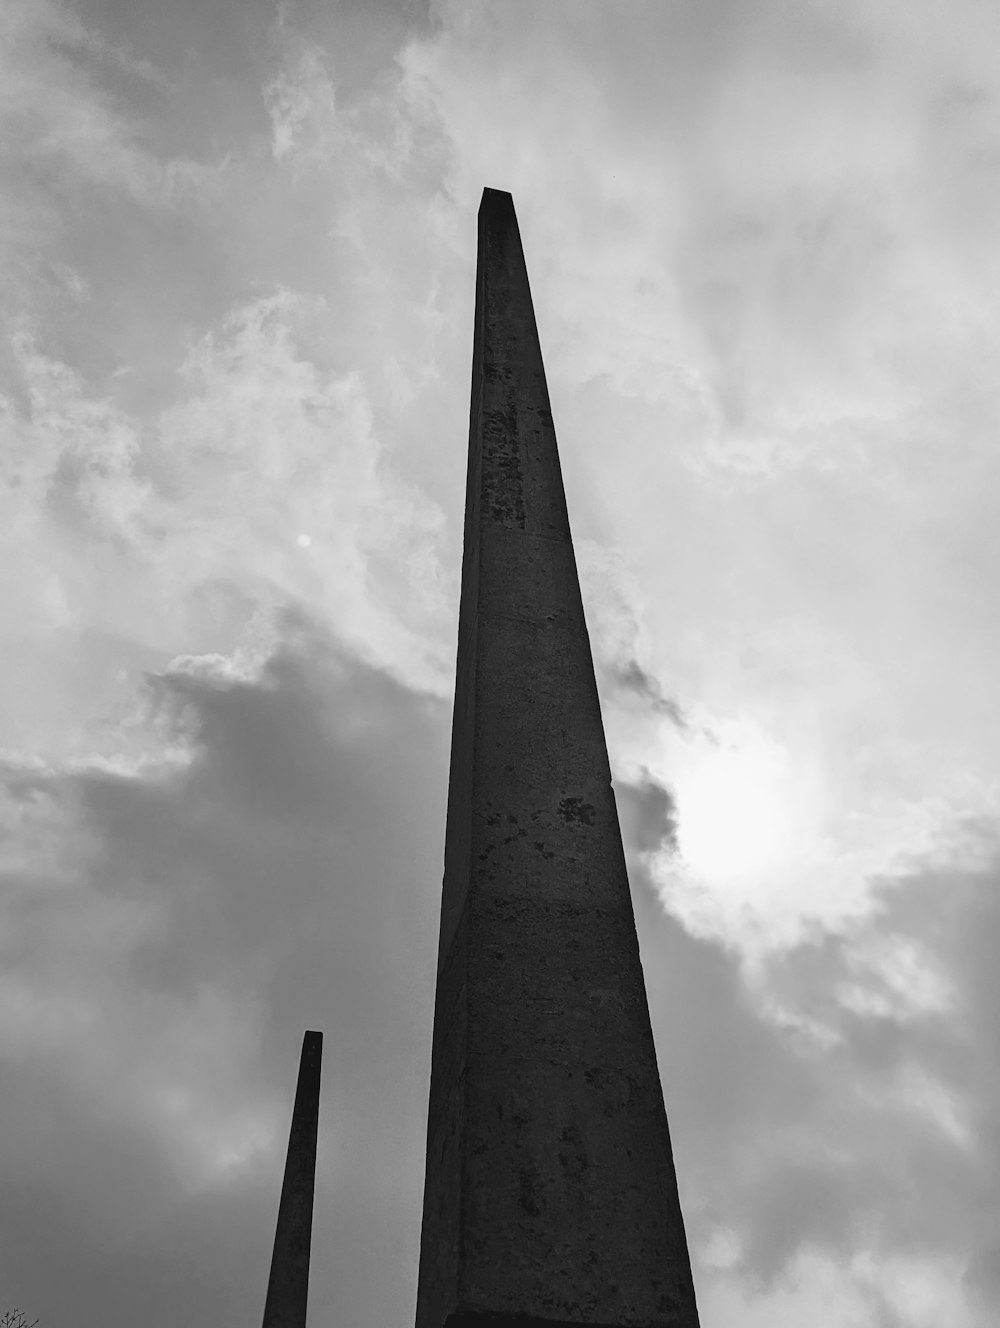 a tall obelisk in front of a cloudy sky